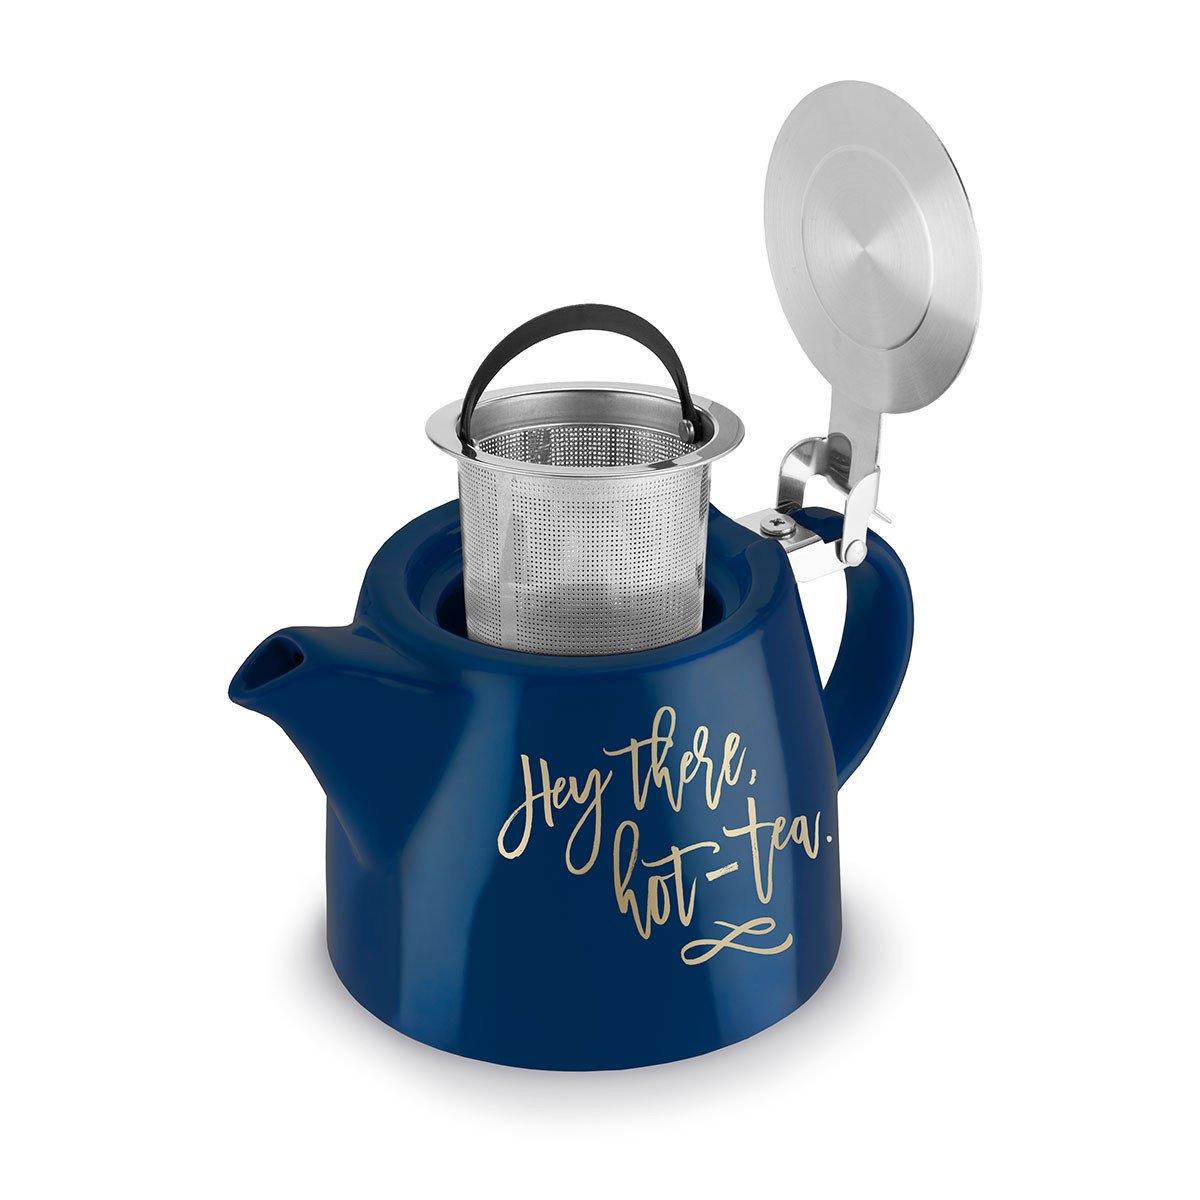 Harper Hey There, Hot-Tea Ceramic Teapot and Infuser - Only £26.99